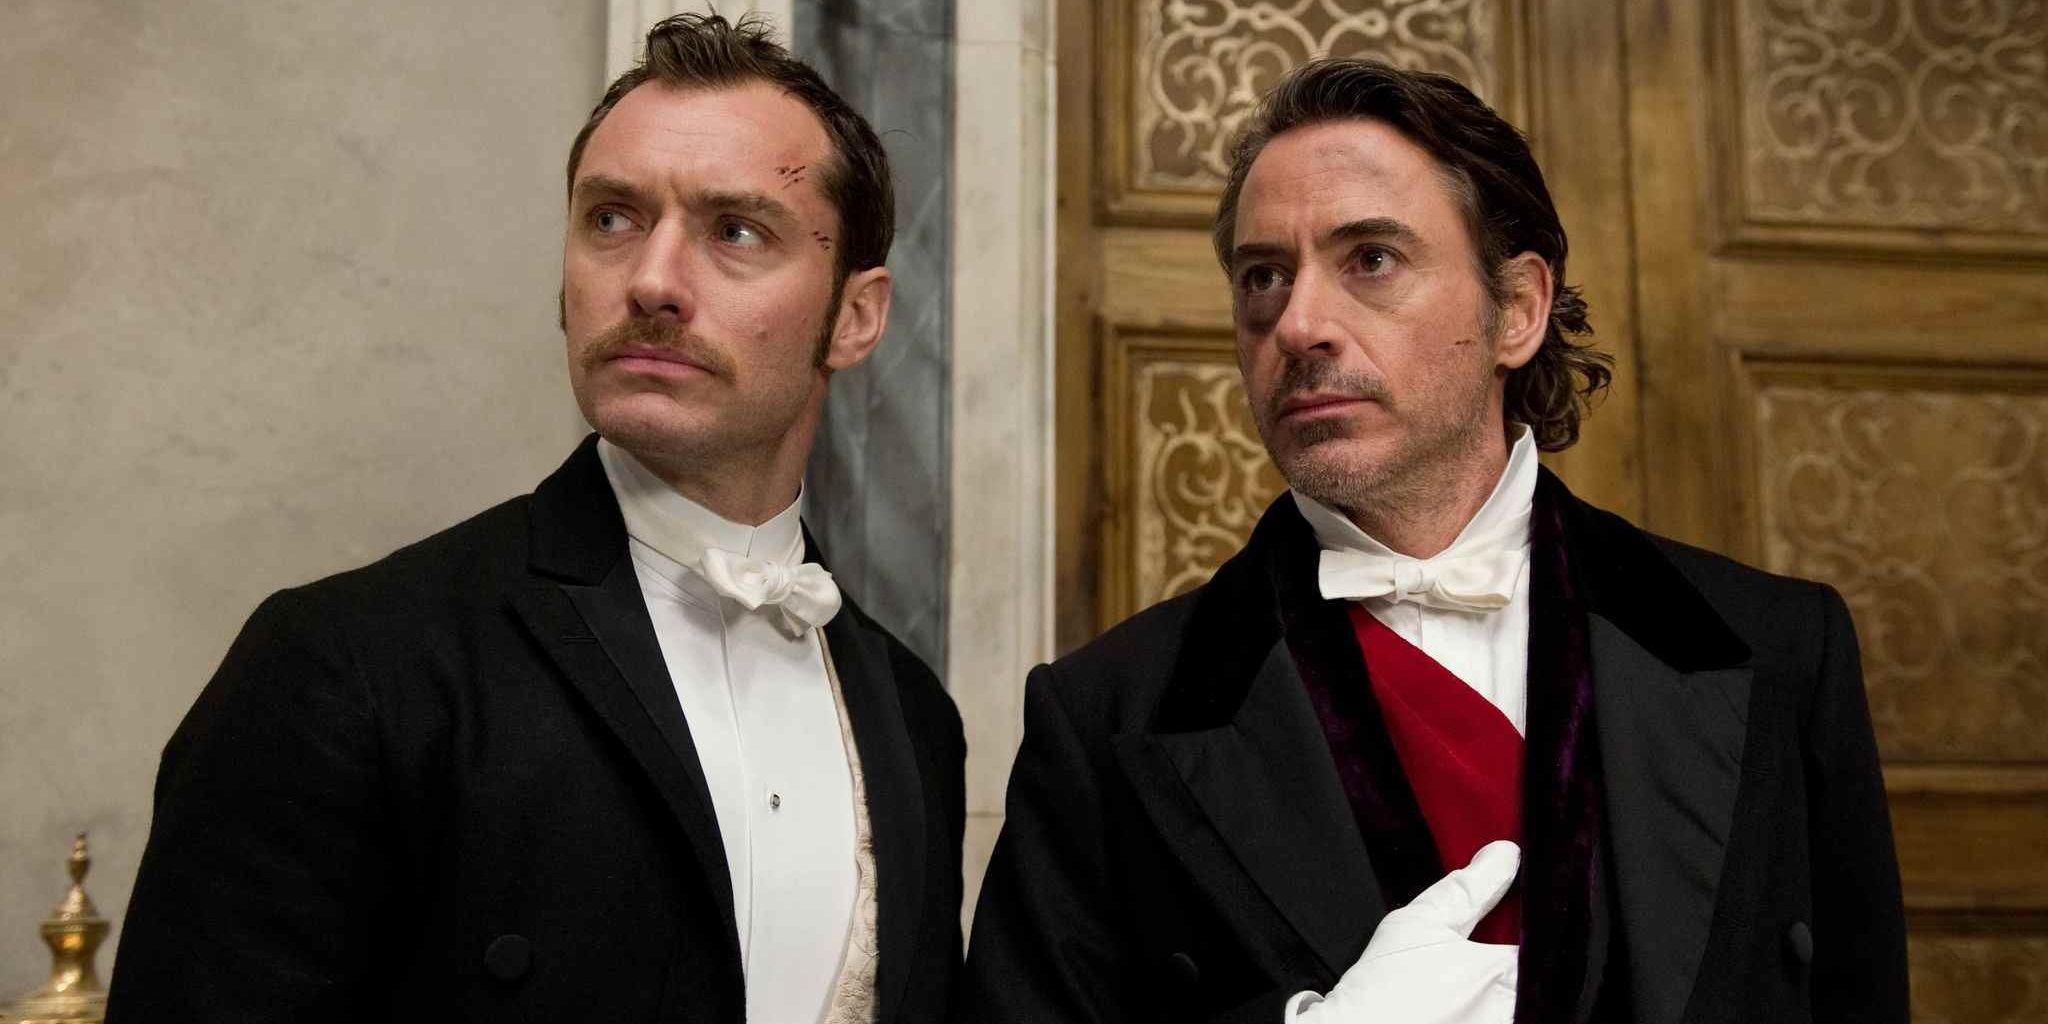 Holmes and Watson in Sherlock Holmes A Game of Shadows